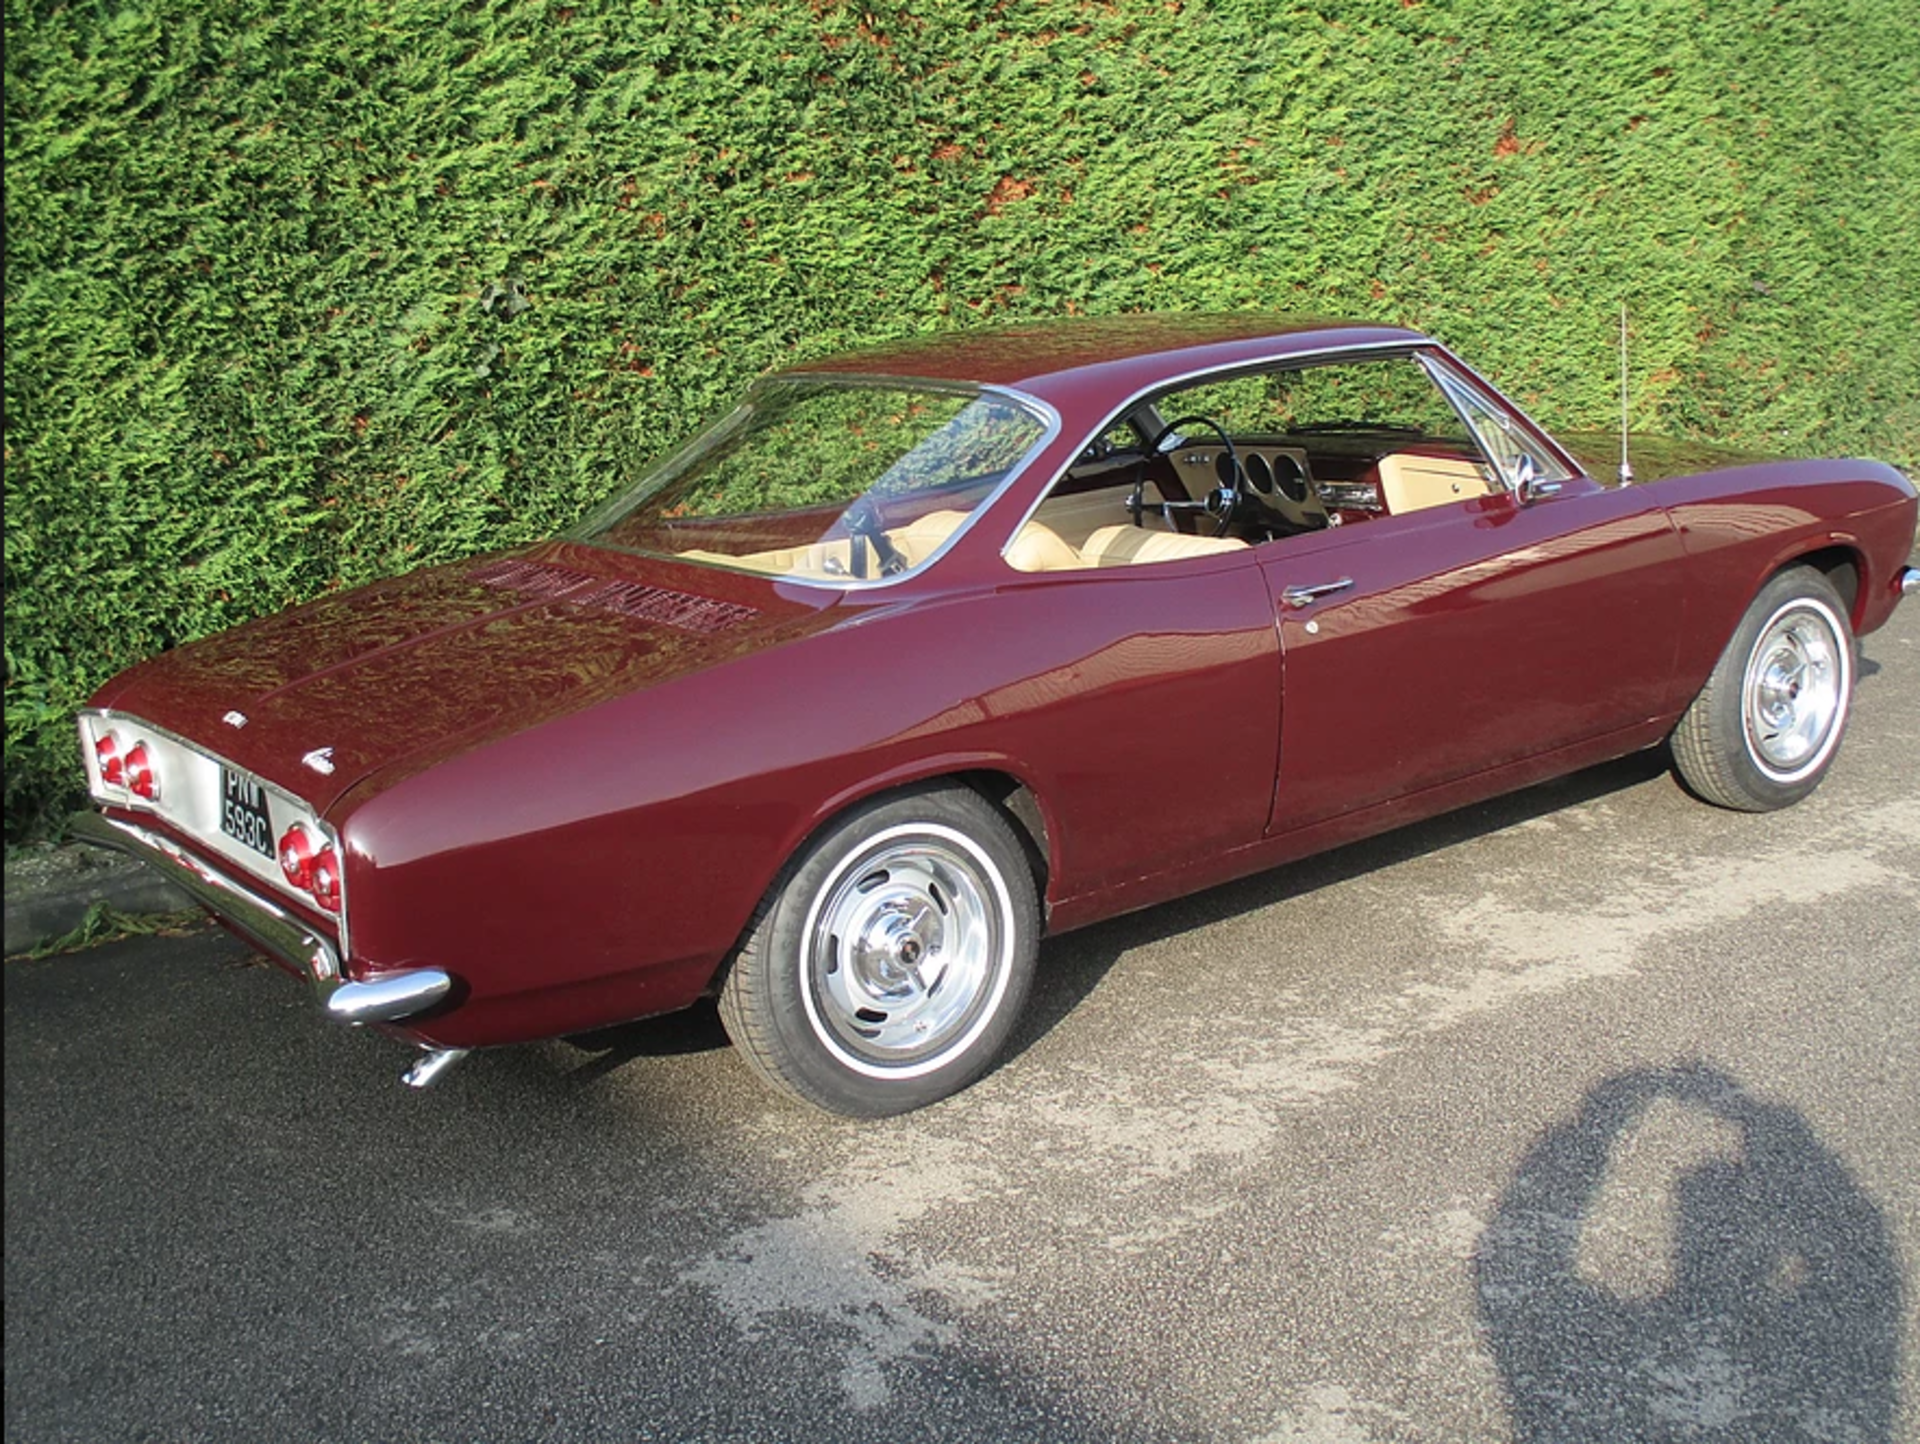 1965 Chevrolet Corvair, 2dr Coupe 110. Immaculate. 19'000 miles from new. - Image 3 of 11